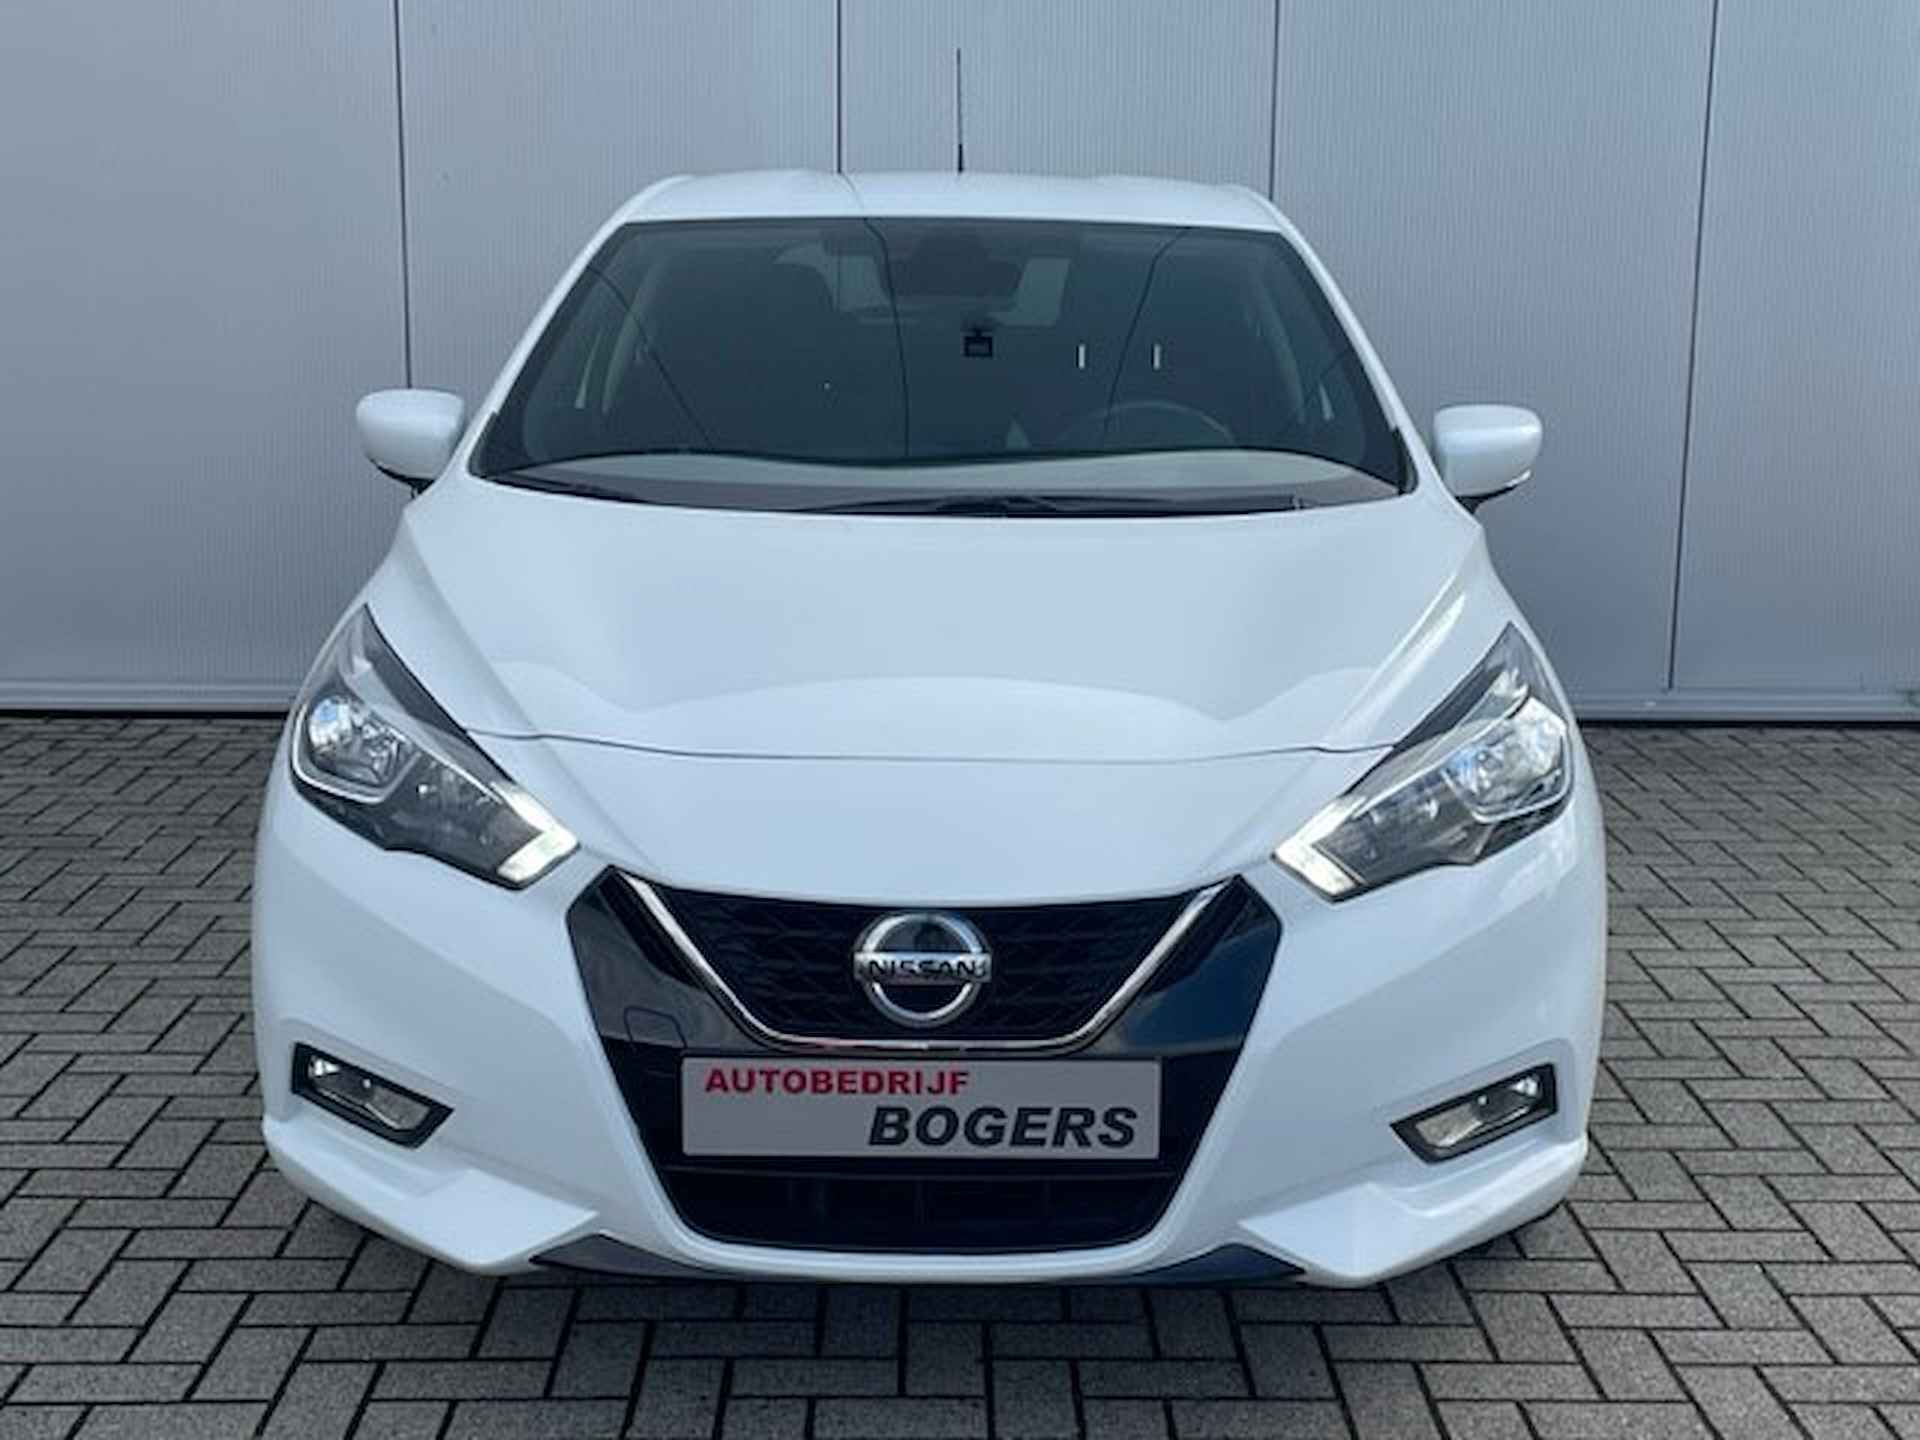 Nissan Micra 1.0 IG-T N-Connecta Automaat Navigatie, Airco, Cruise Control, 16"Lm, Achteruitrijcamera - 22/23